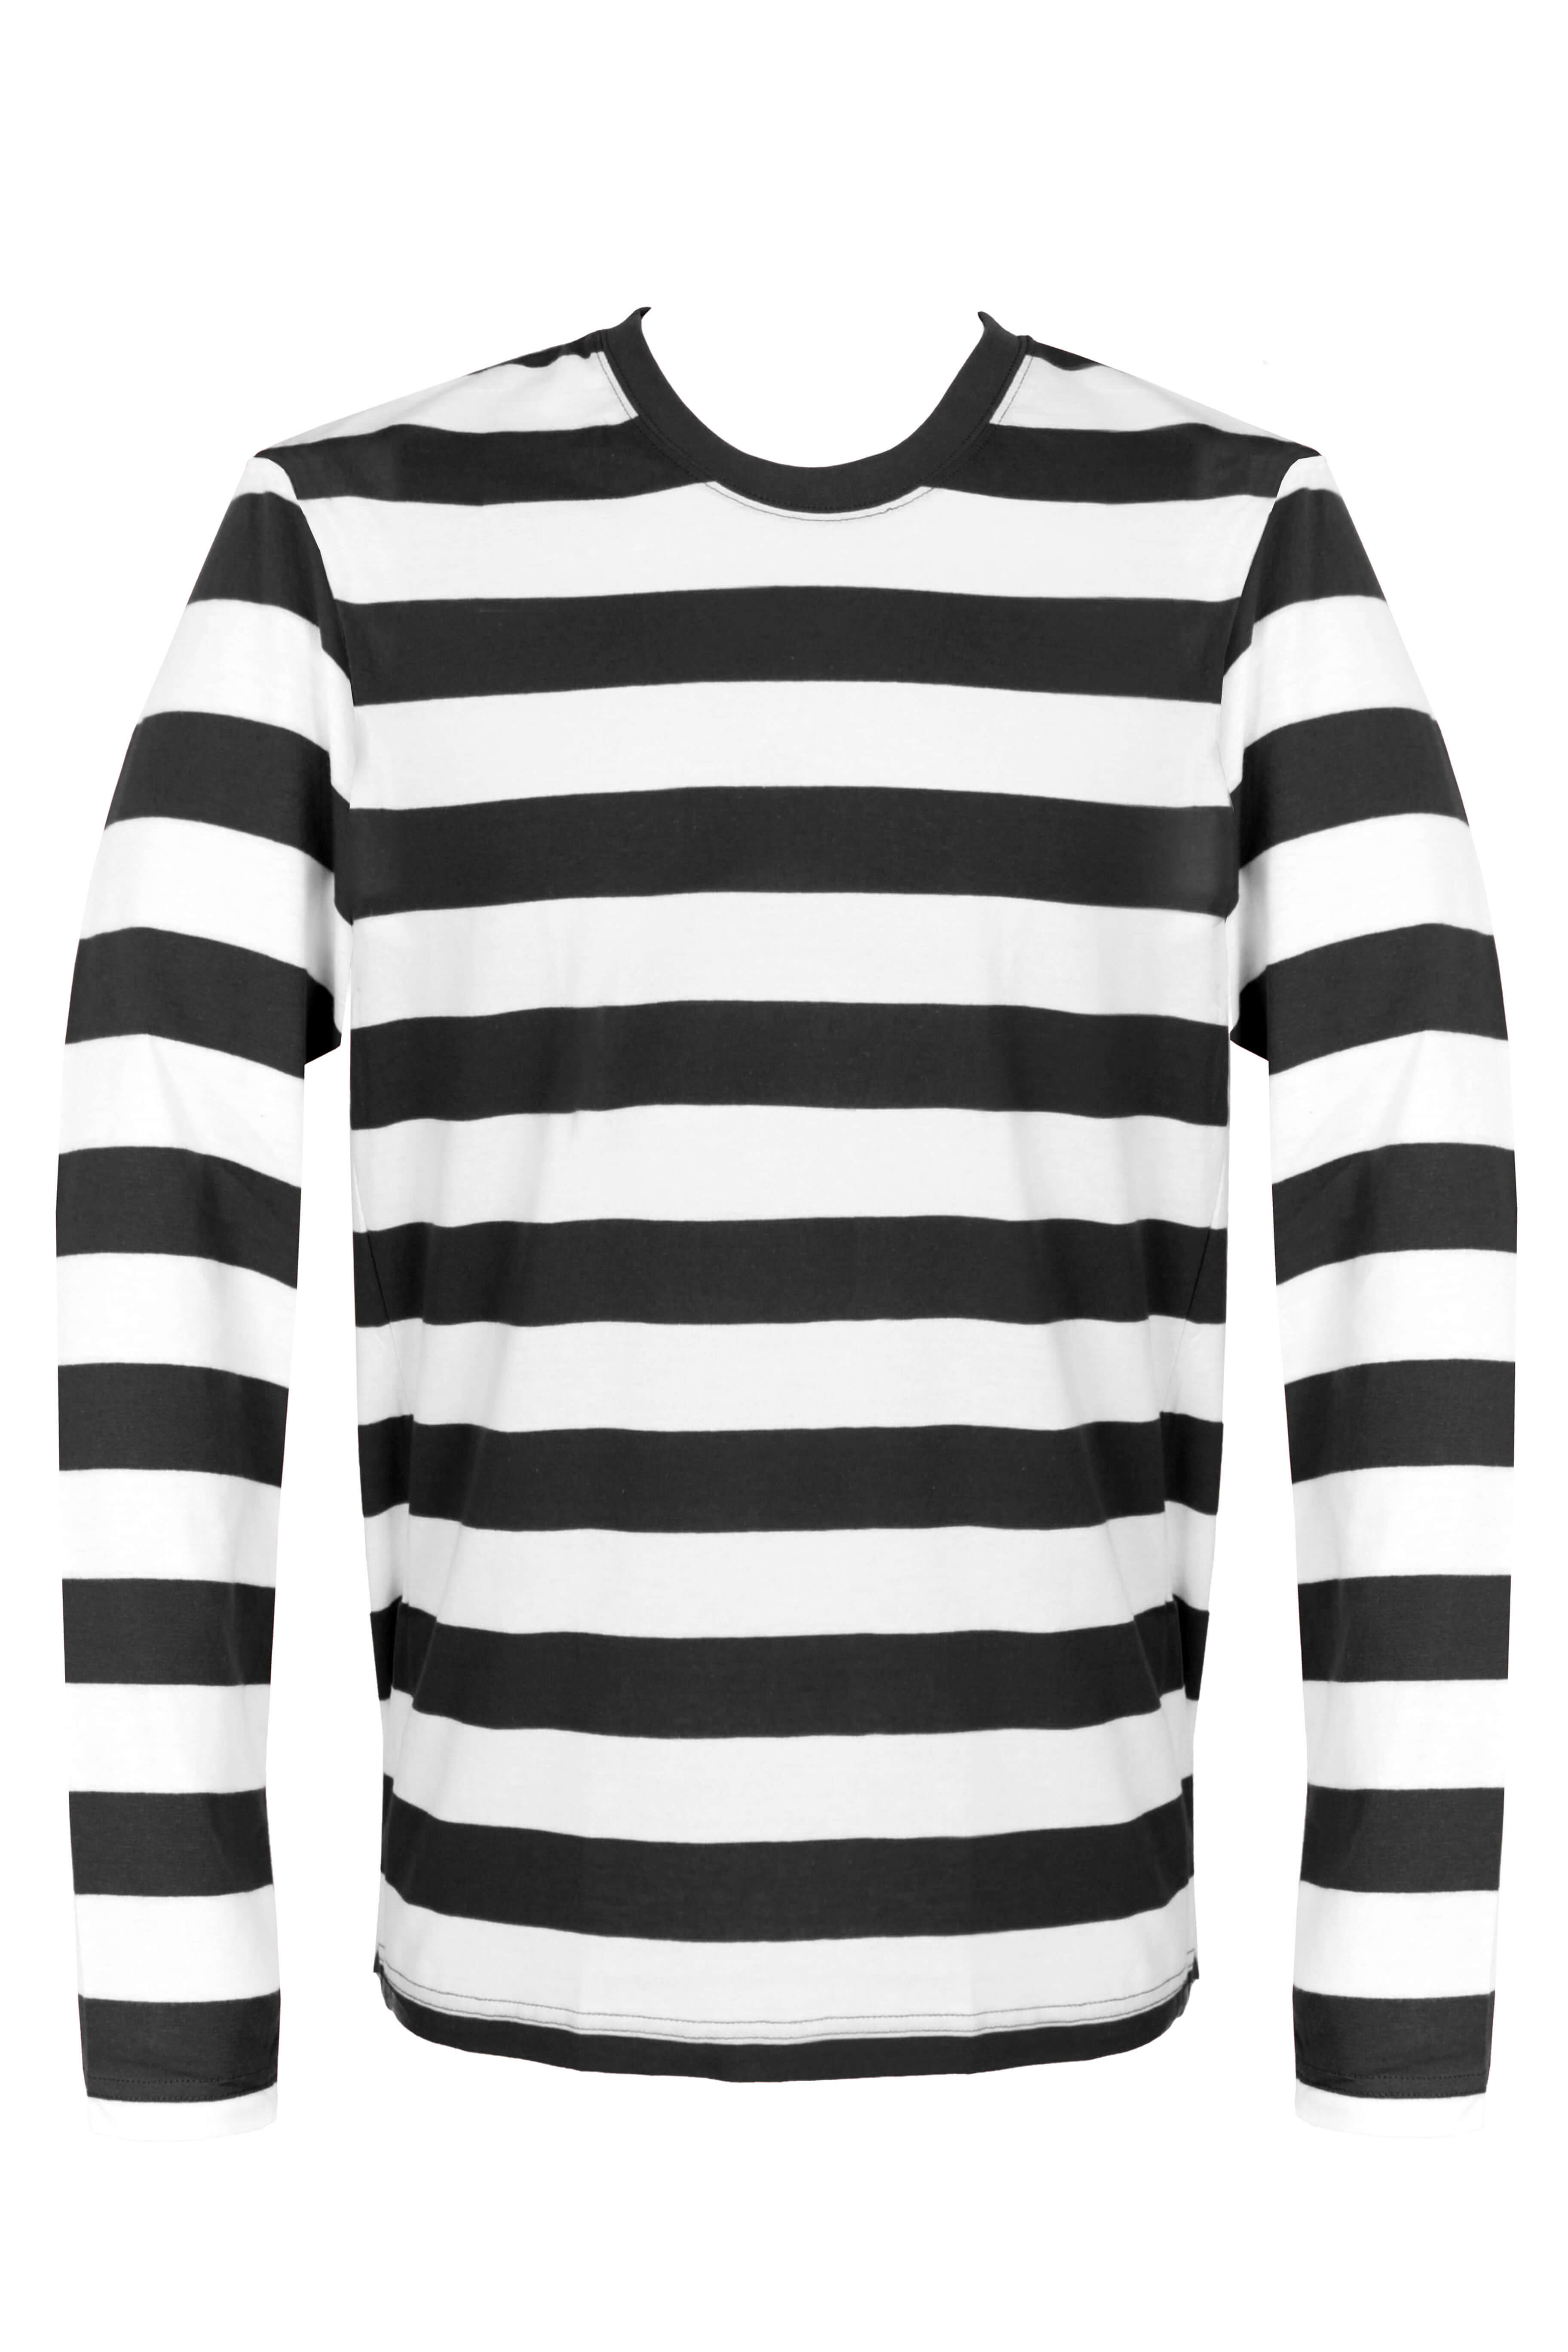 Adults Black and White Striped Long Sleeve Top - I Love Fancy Dress